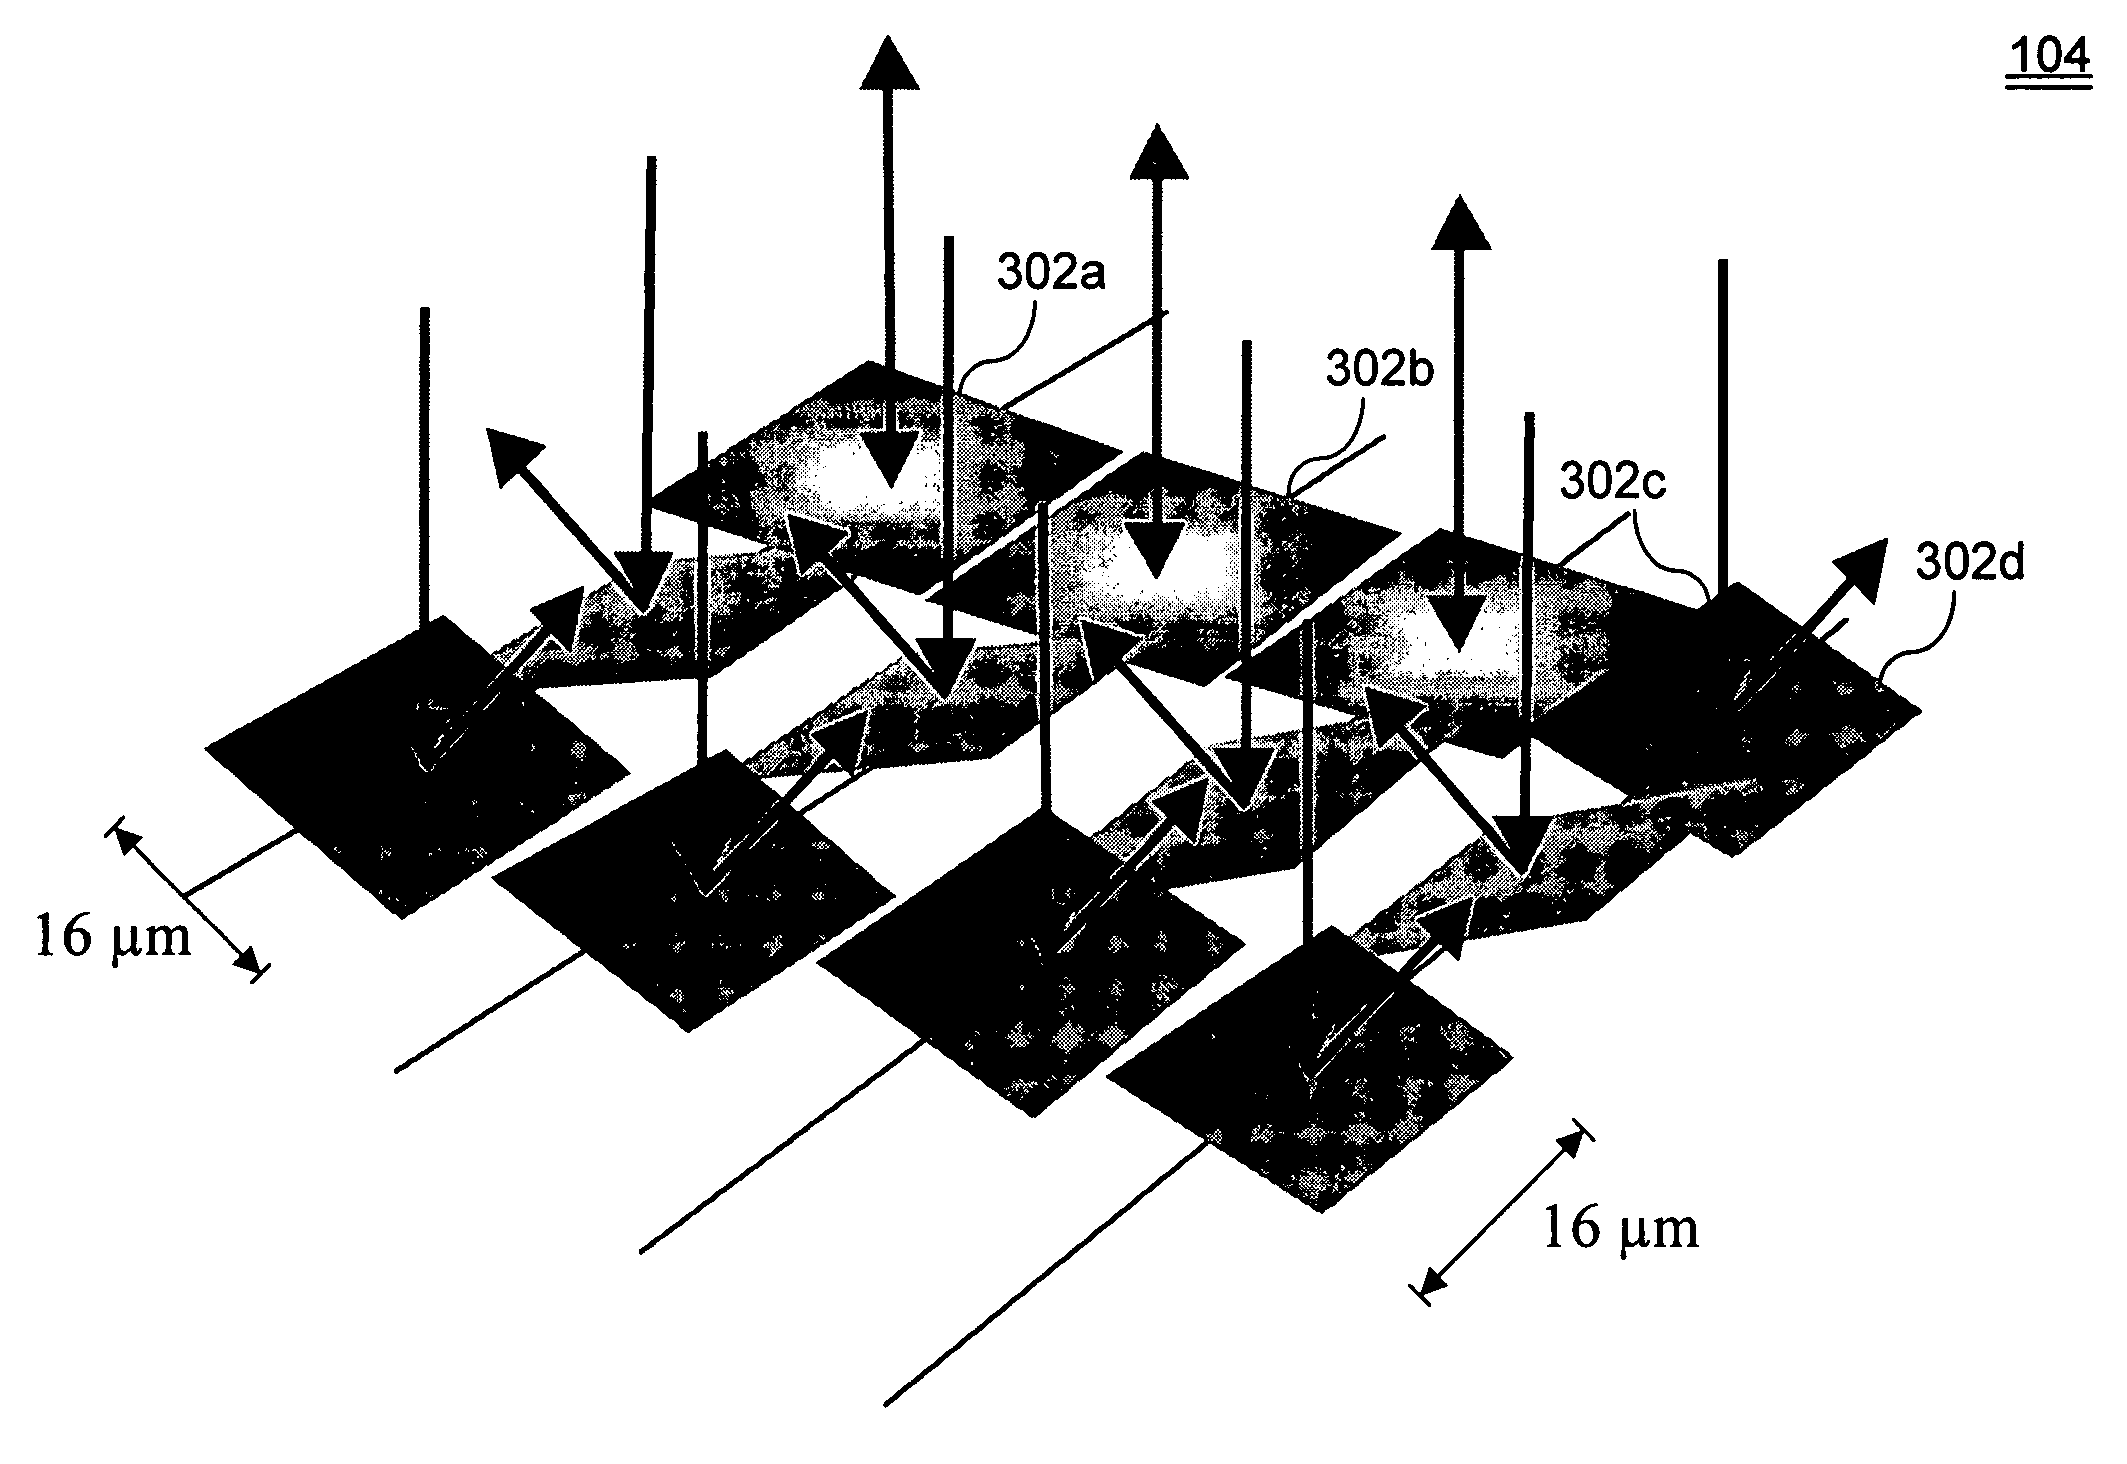 System and method for calculating aerial image of a spatial light modulator